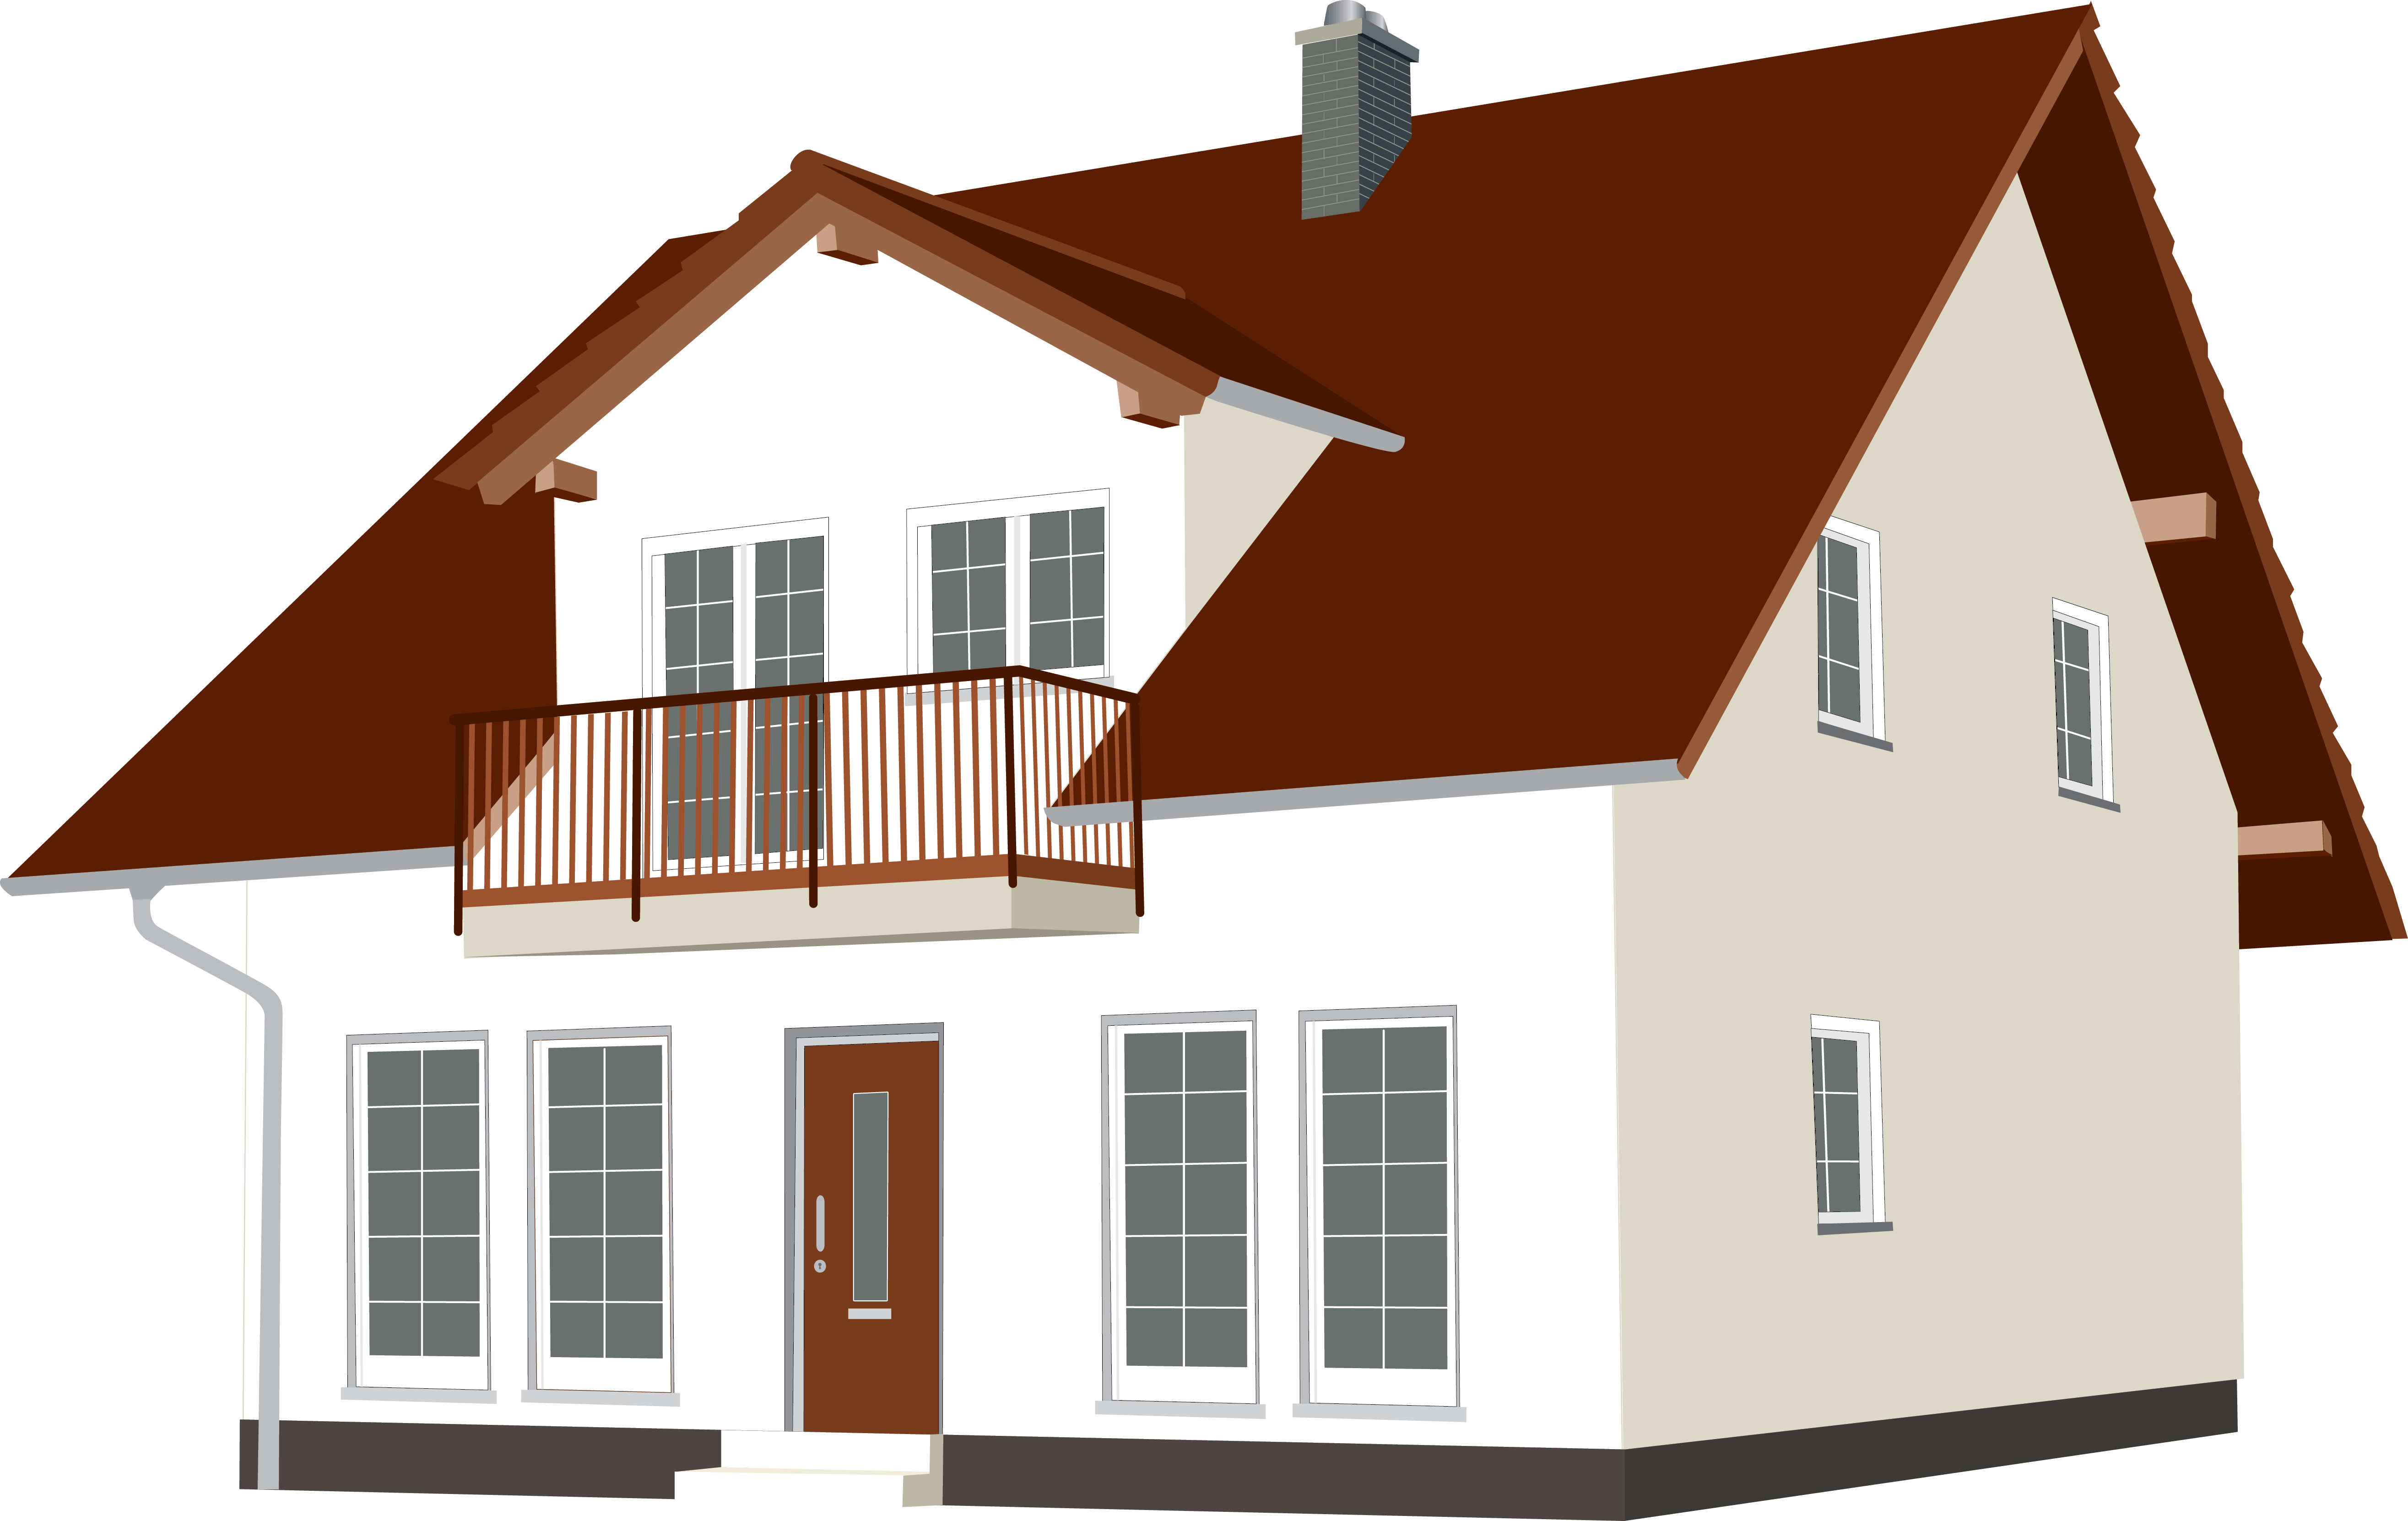 House Clip Art Images | Free Photos, PNG Stickers, Wallpapers - Clip ...